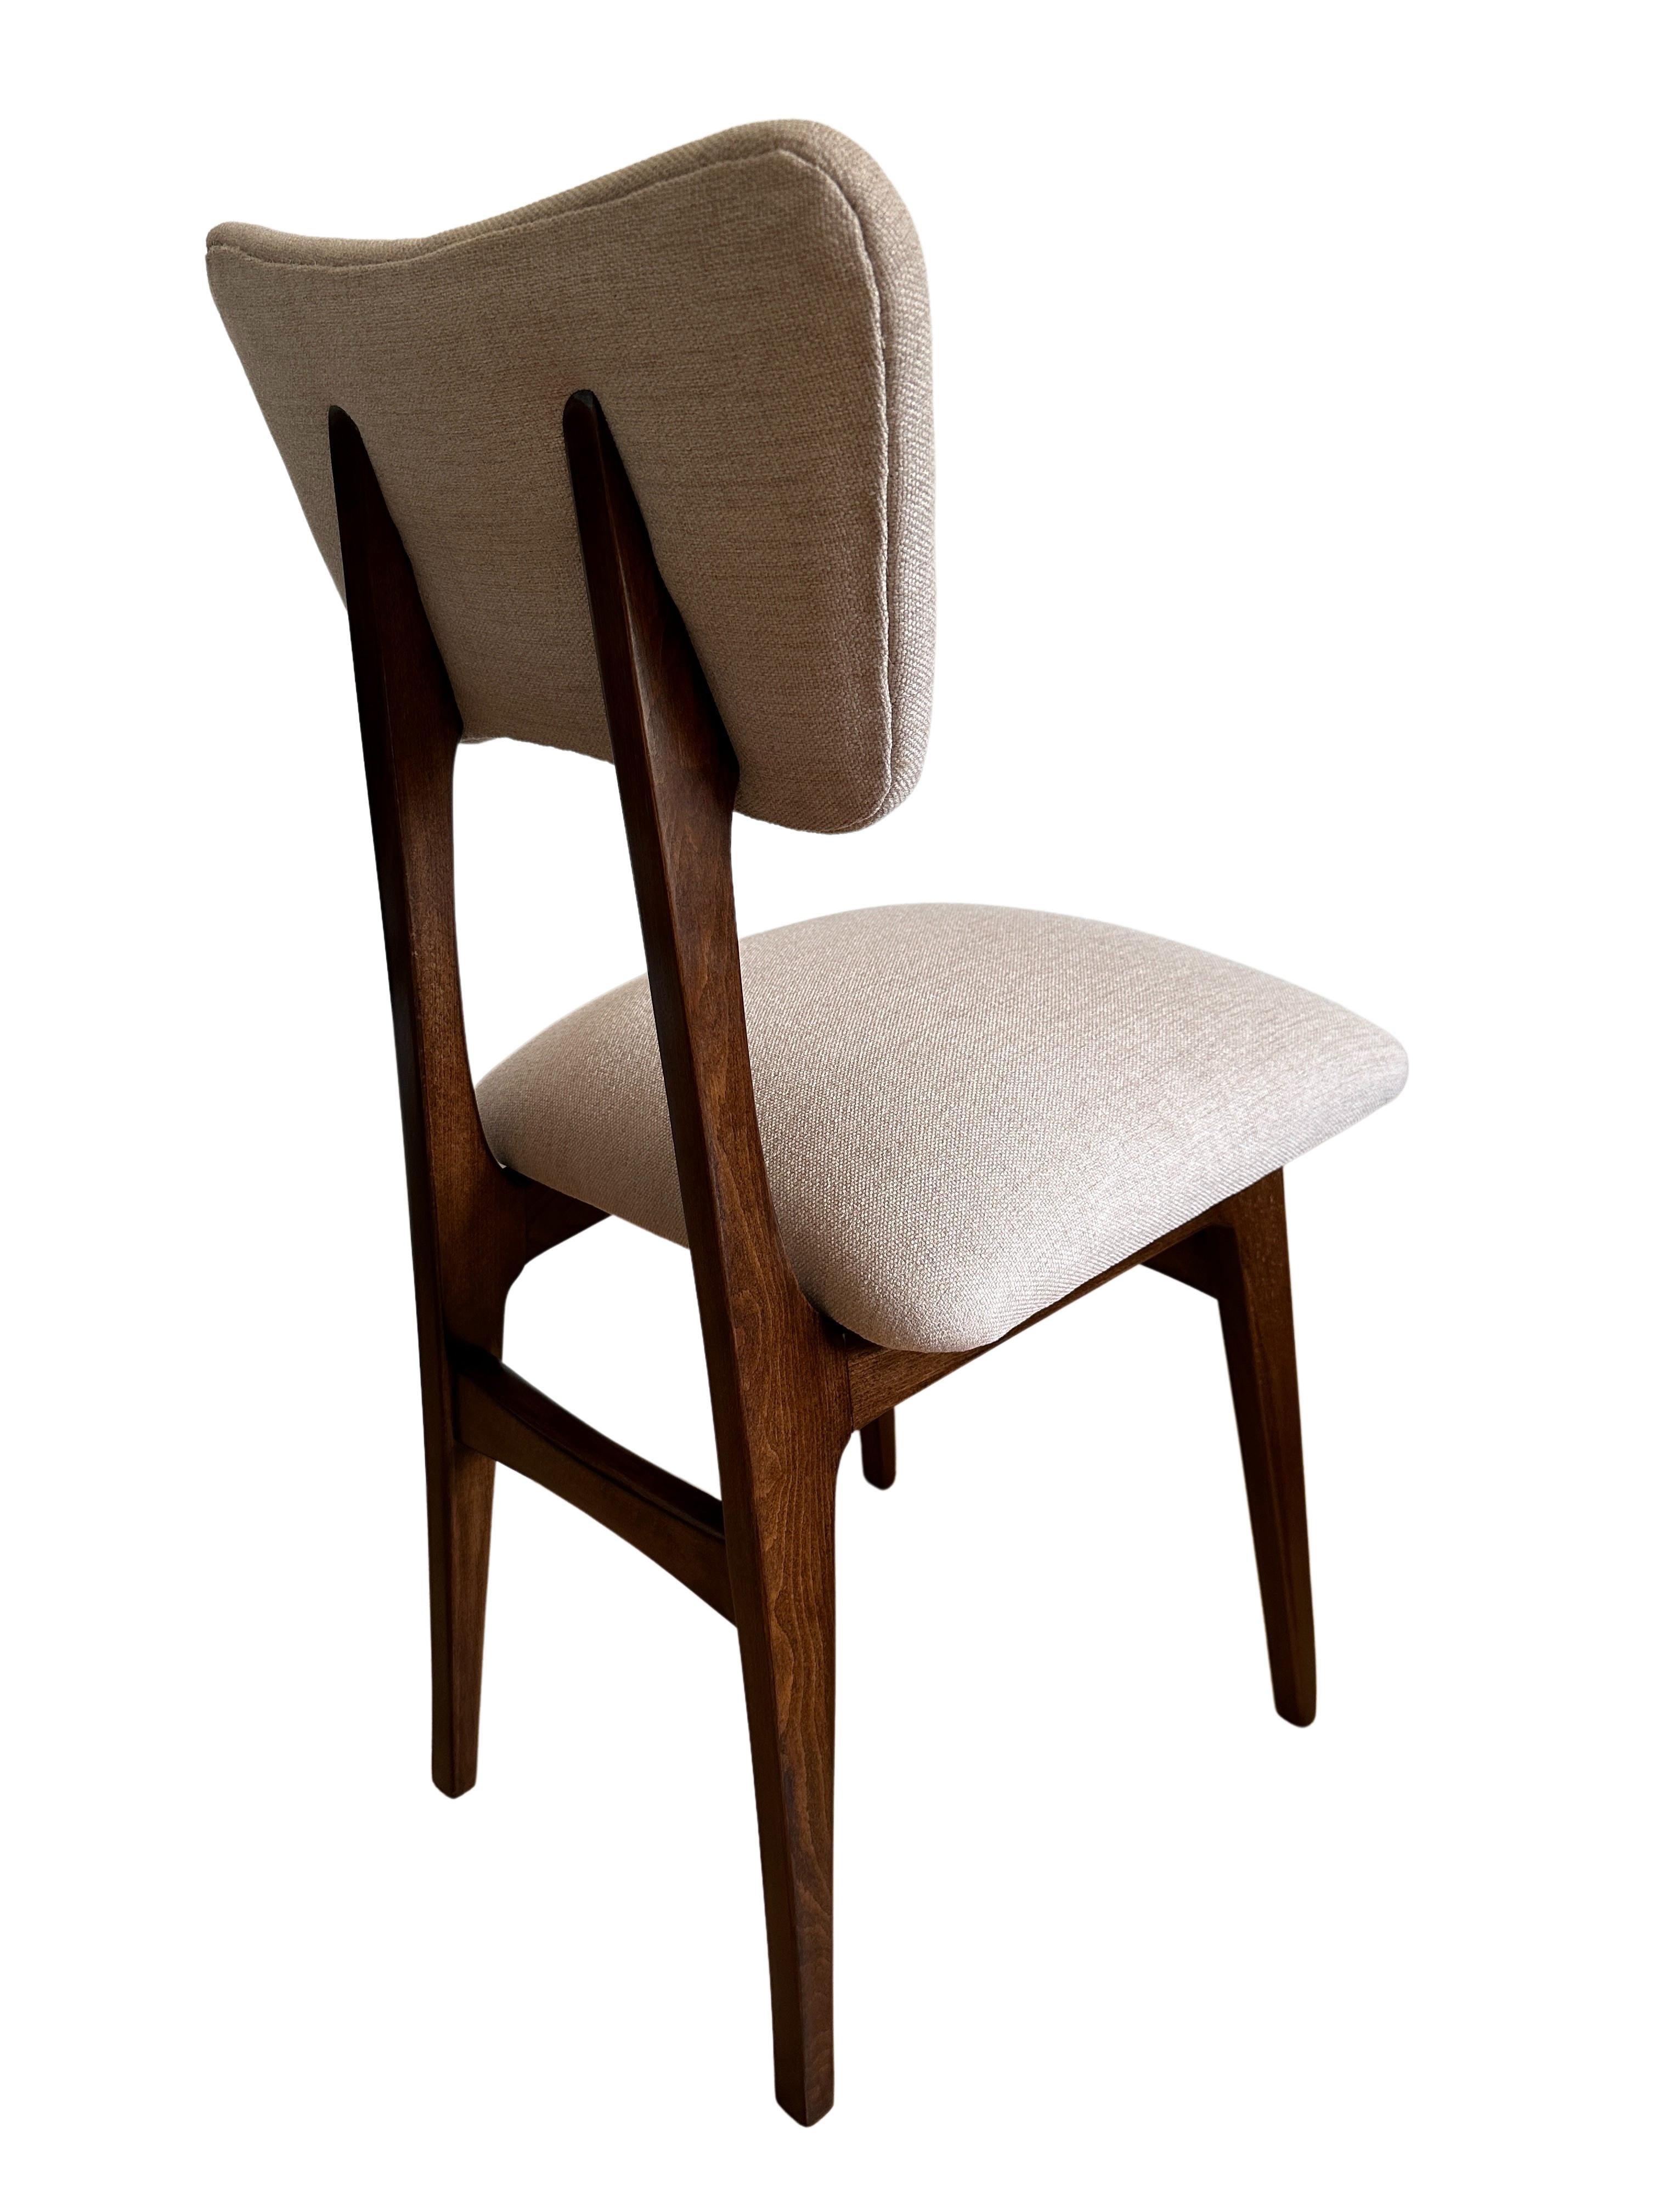 Set of 6 Midcentury Beige and Grey Dining Chairs, Europe, 1960s For Sale 2